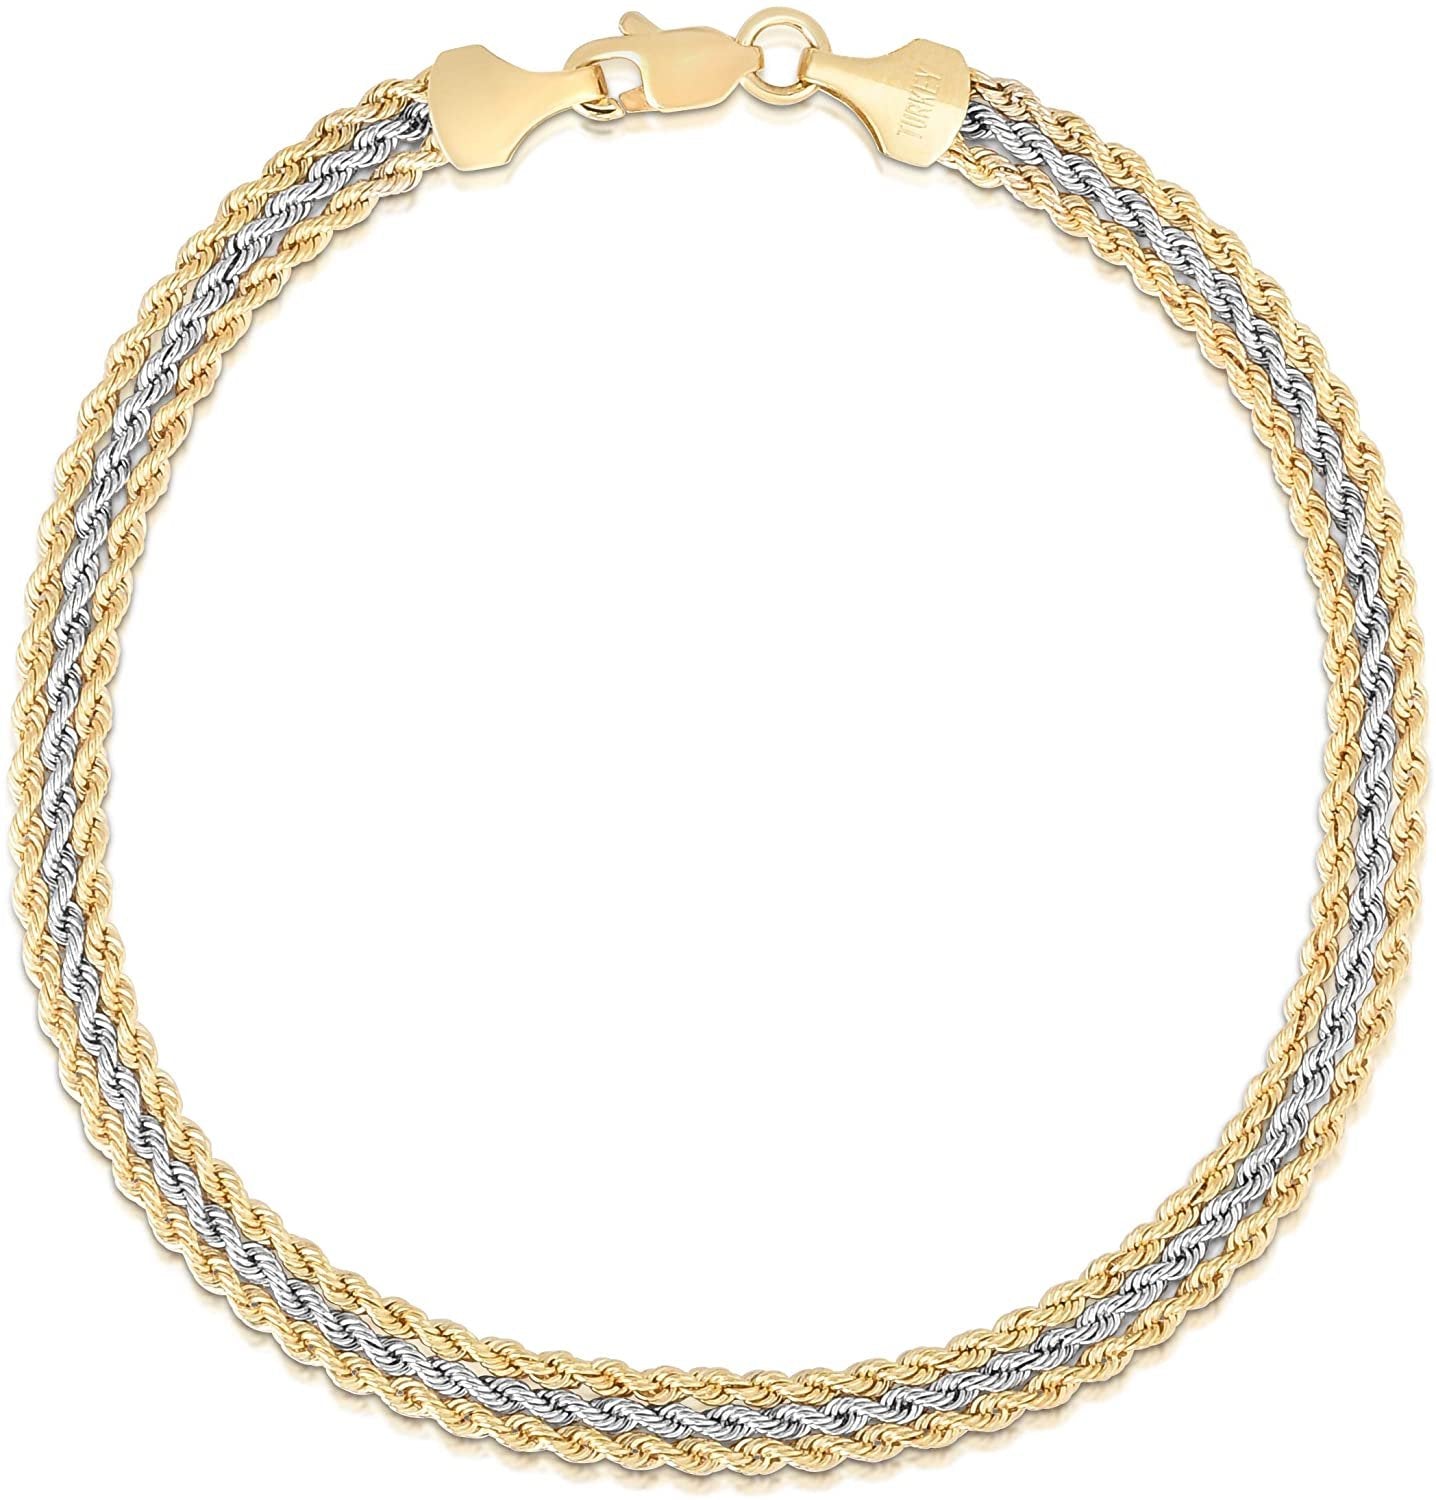 10k Two Tone Yellow and White Gold Triple Strand Rope Bracelet 7.25”